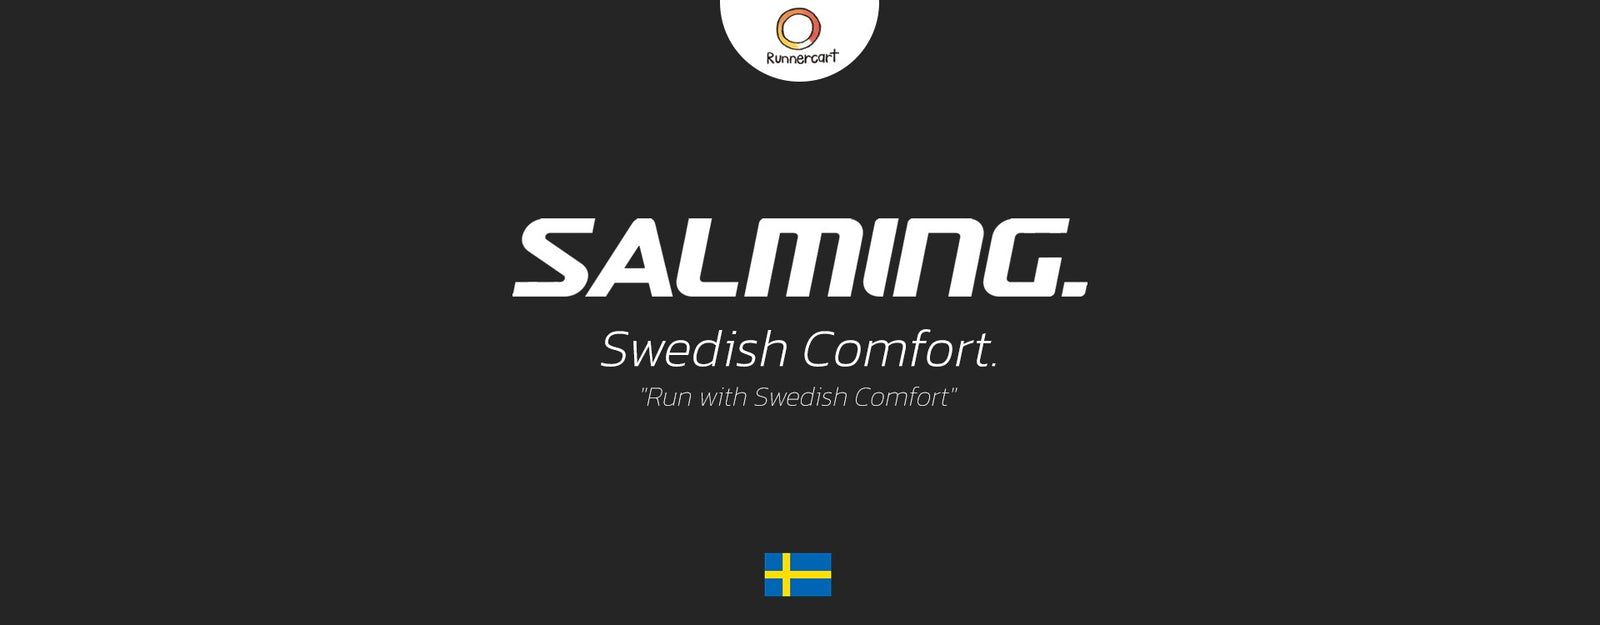 SALMING RECOIL PRIME - "SWEDISH COMFORT RUNNING SHOES"